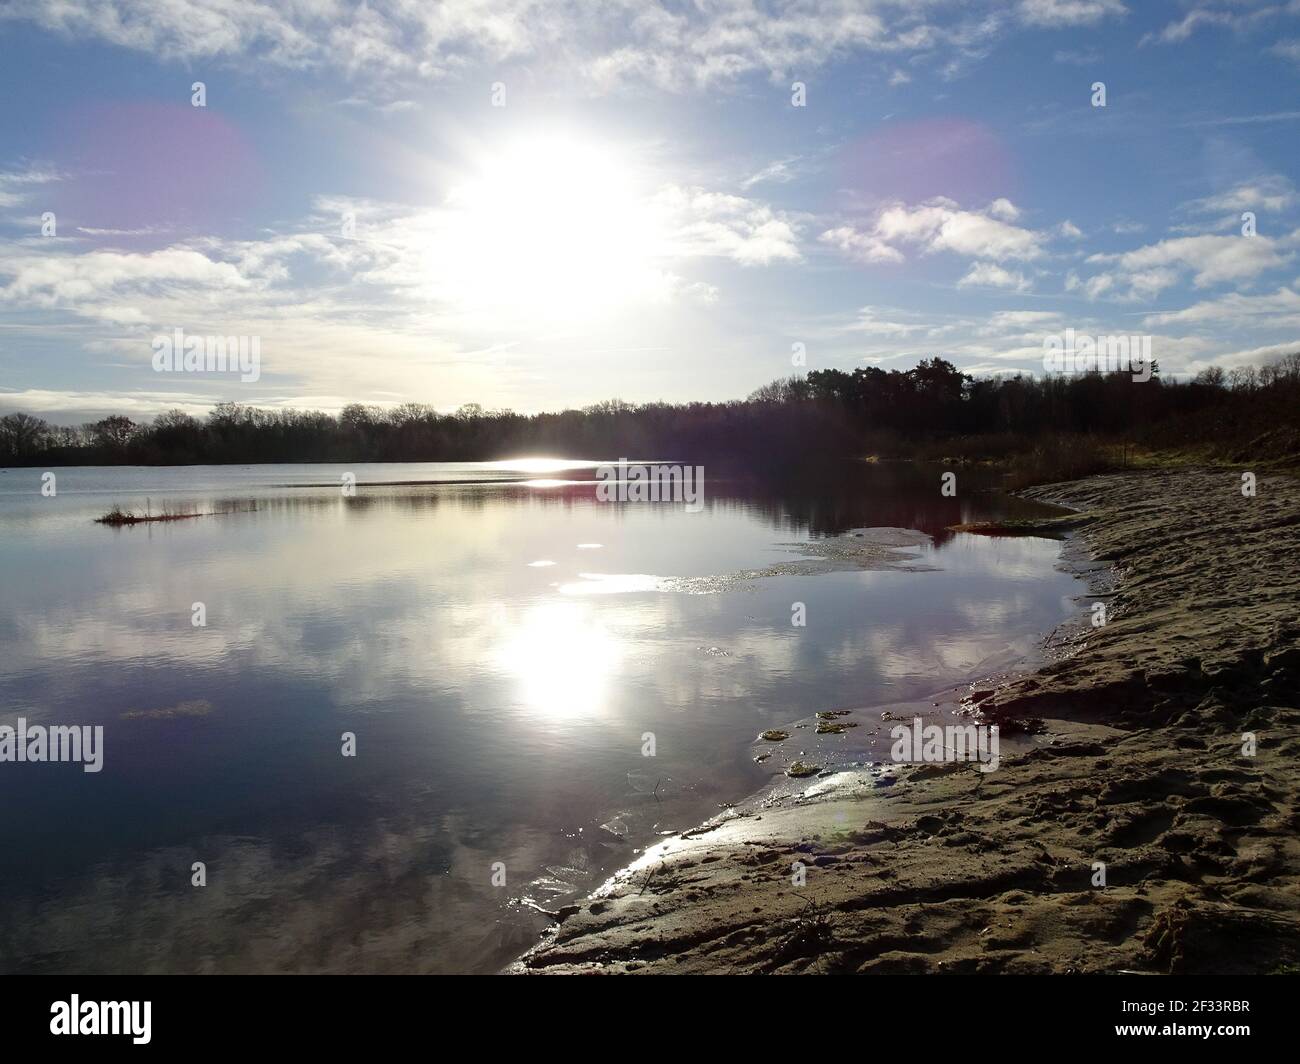 The bank of a little lake. It's sand. Reflection of the sun in the water. It's a bright winter day. Some lens flare. The lake has light blue water. Stock Photo